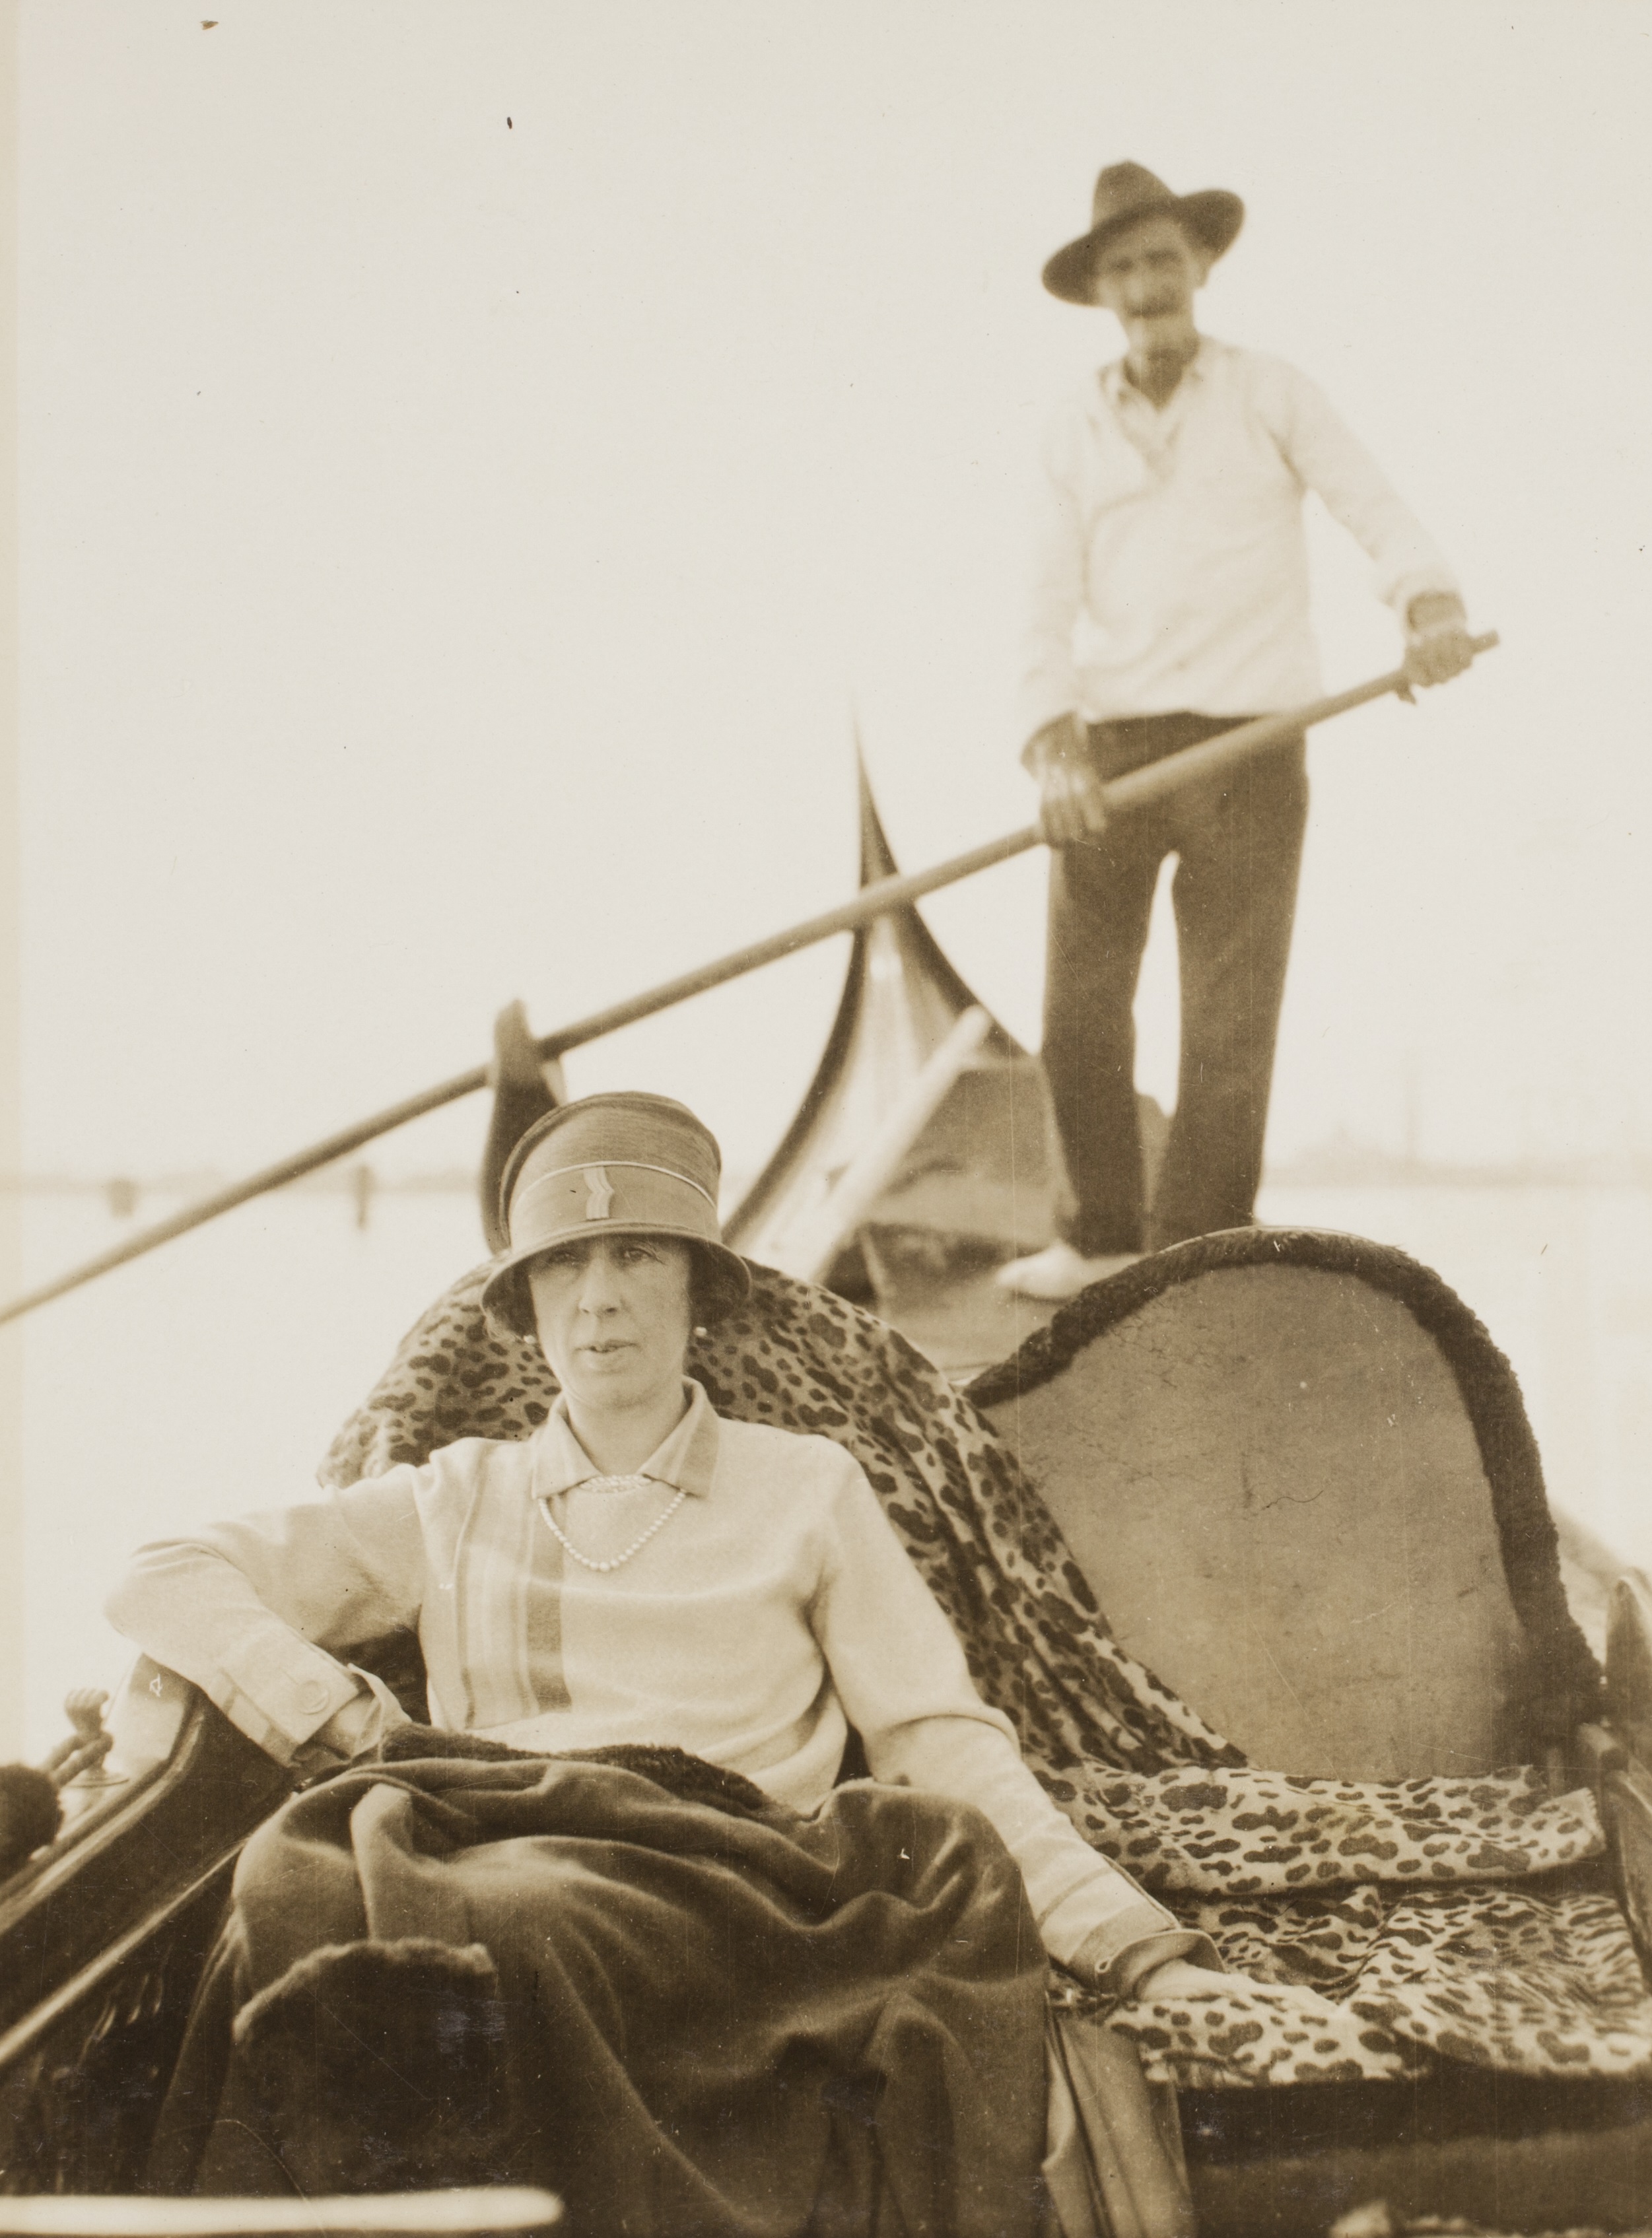 Woman sitting in gondala, man standing and holding rowing ore in gondola behind her